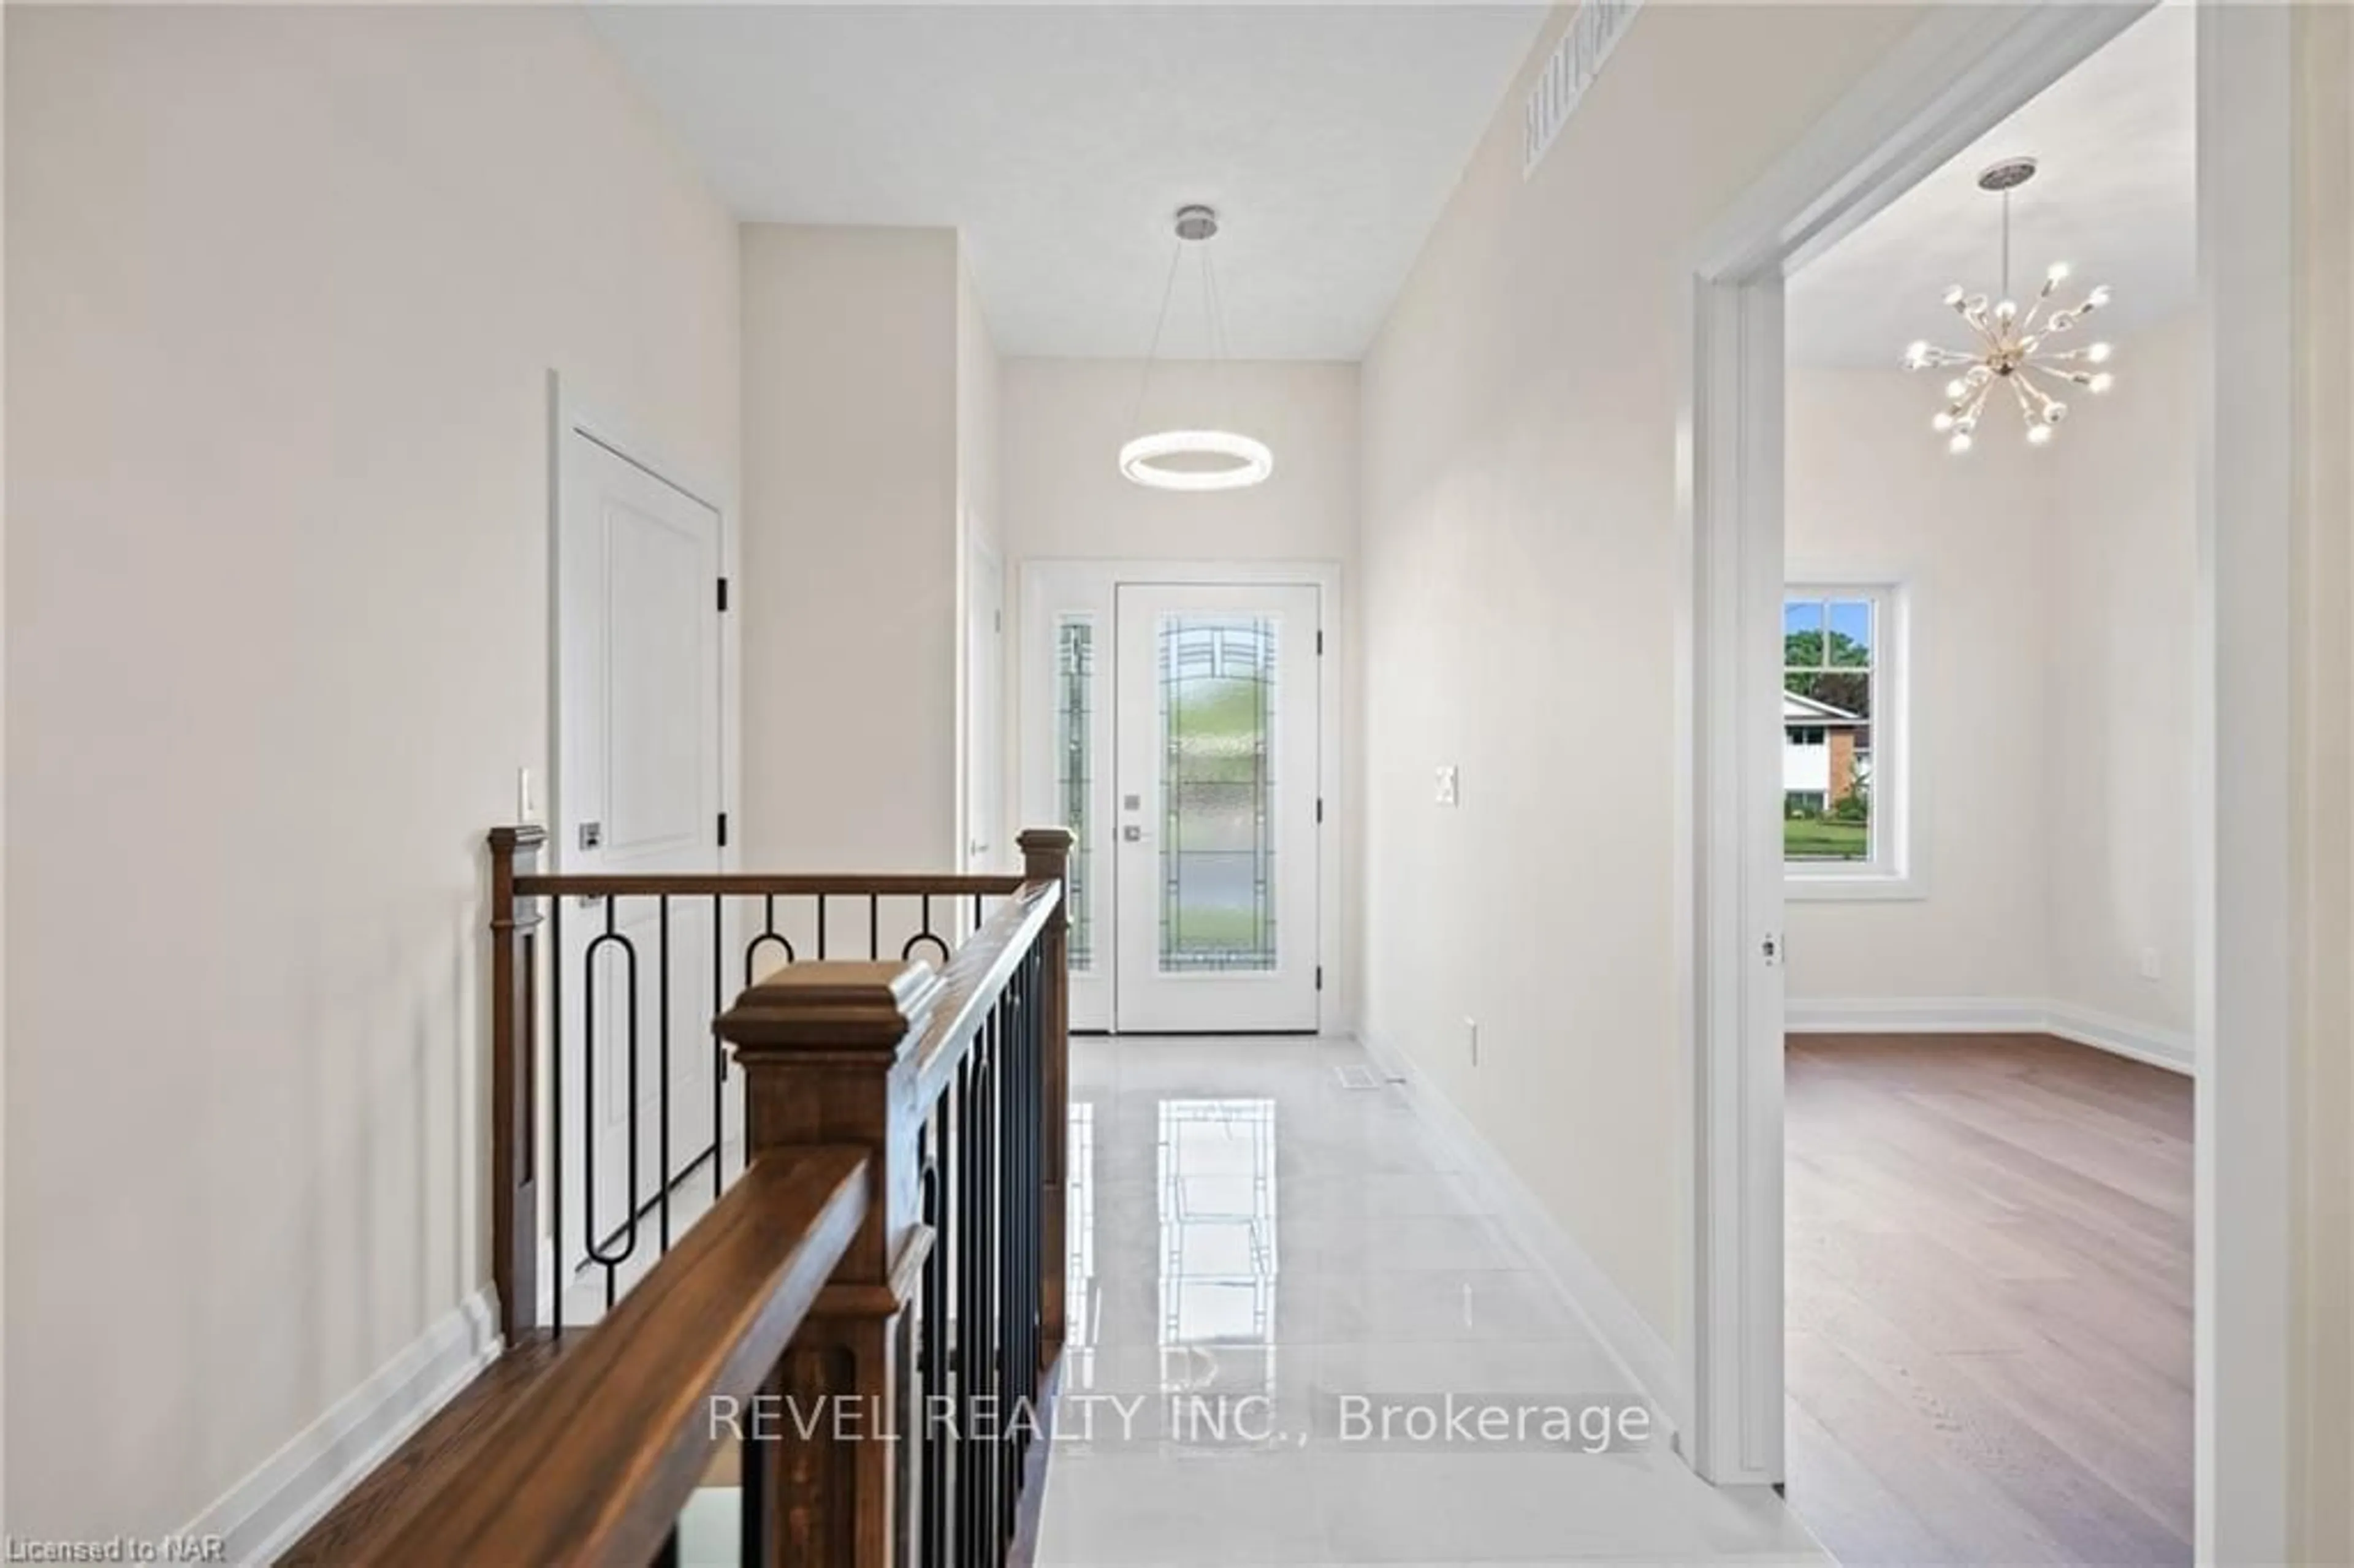 Indoor entryway for 492 Vine St, St. Catharines Ontario L2M 3T5